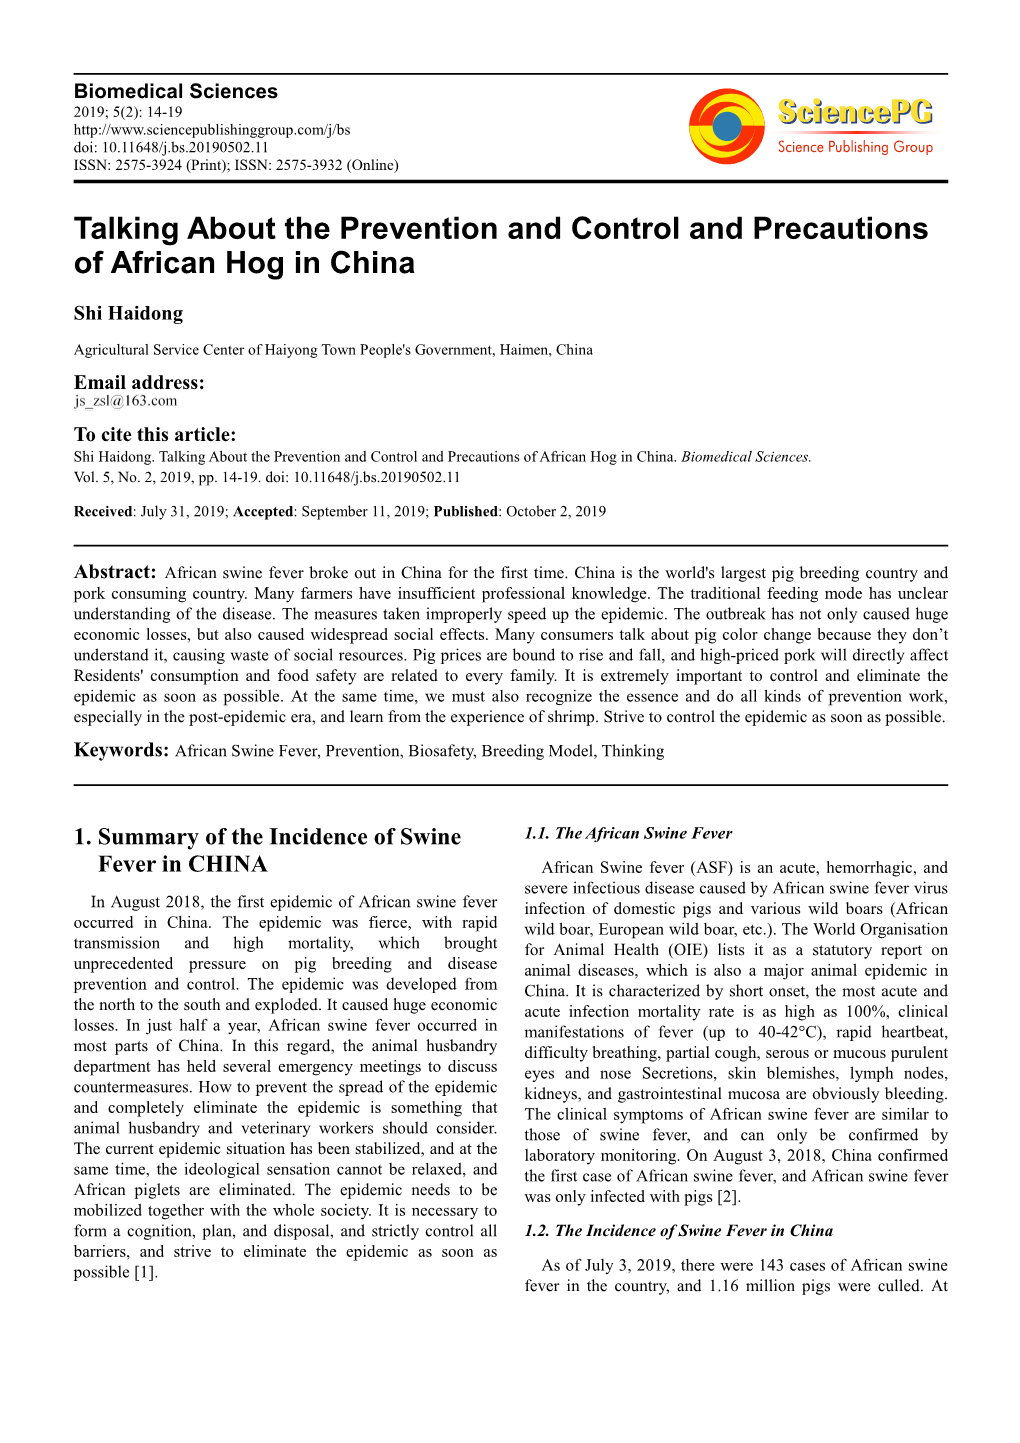 Talking About the Prevention and Control and Precautions of African Hog in China